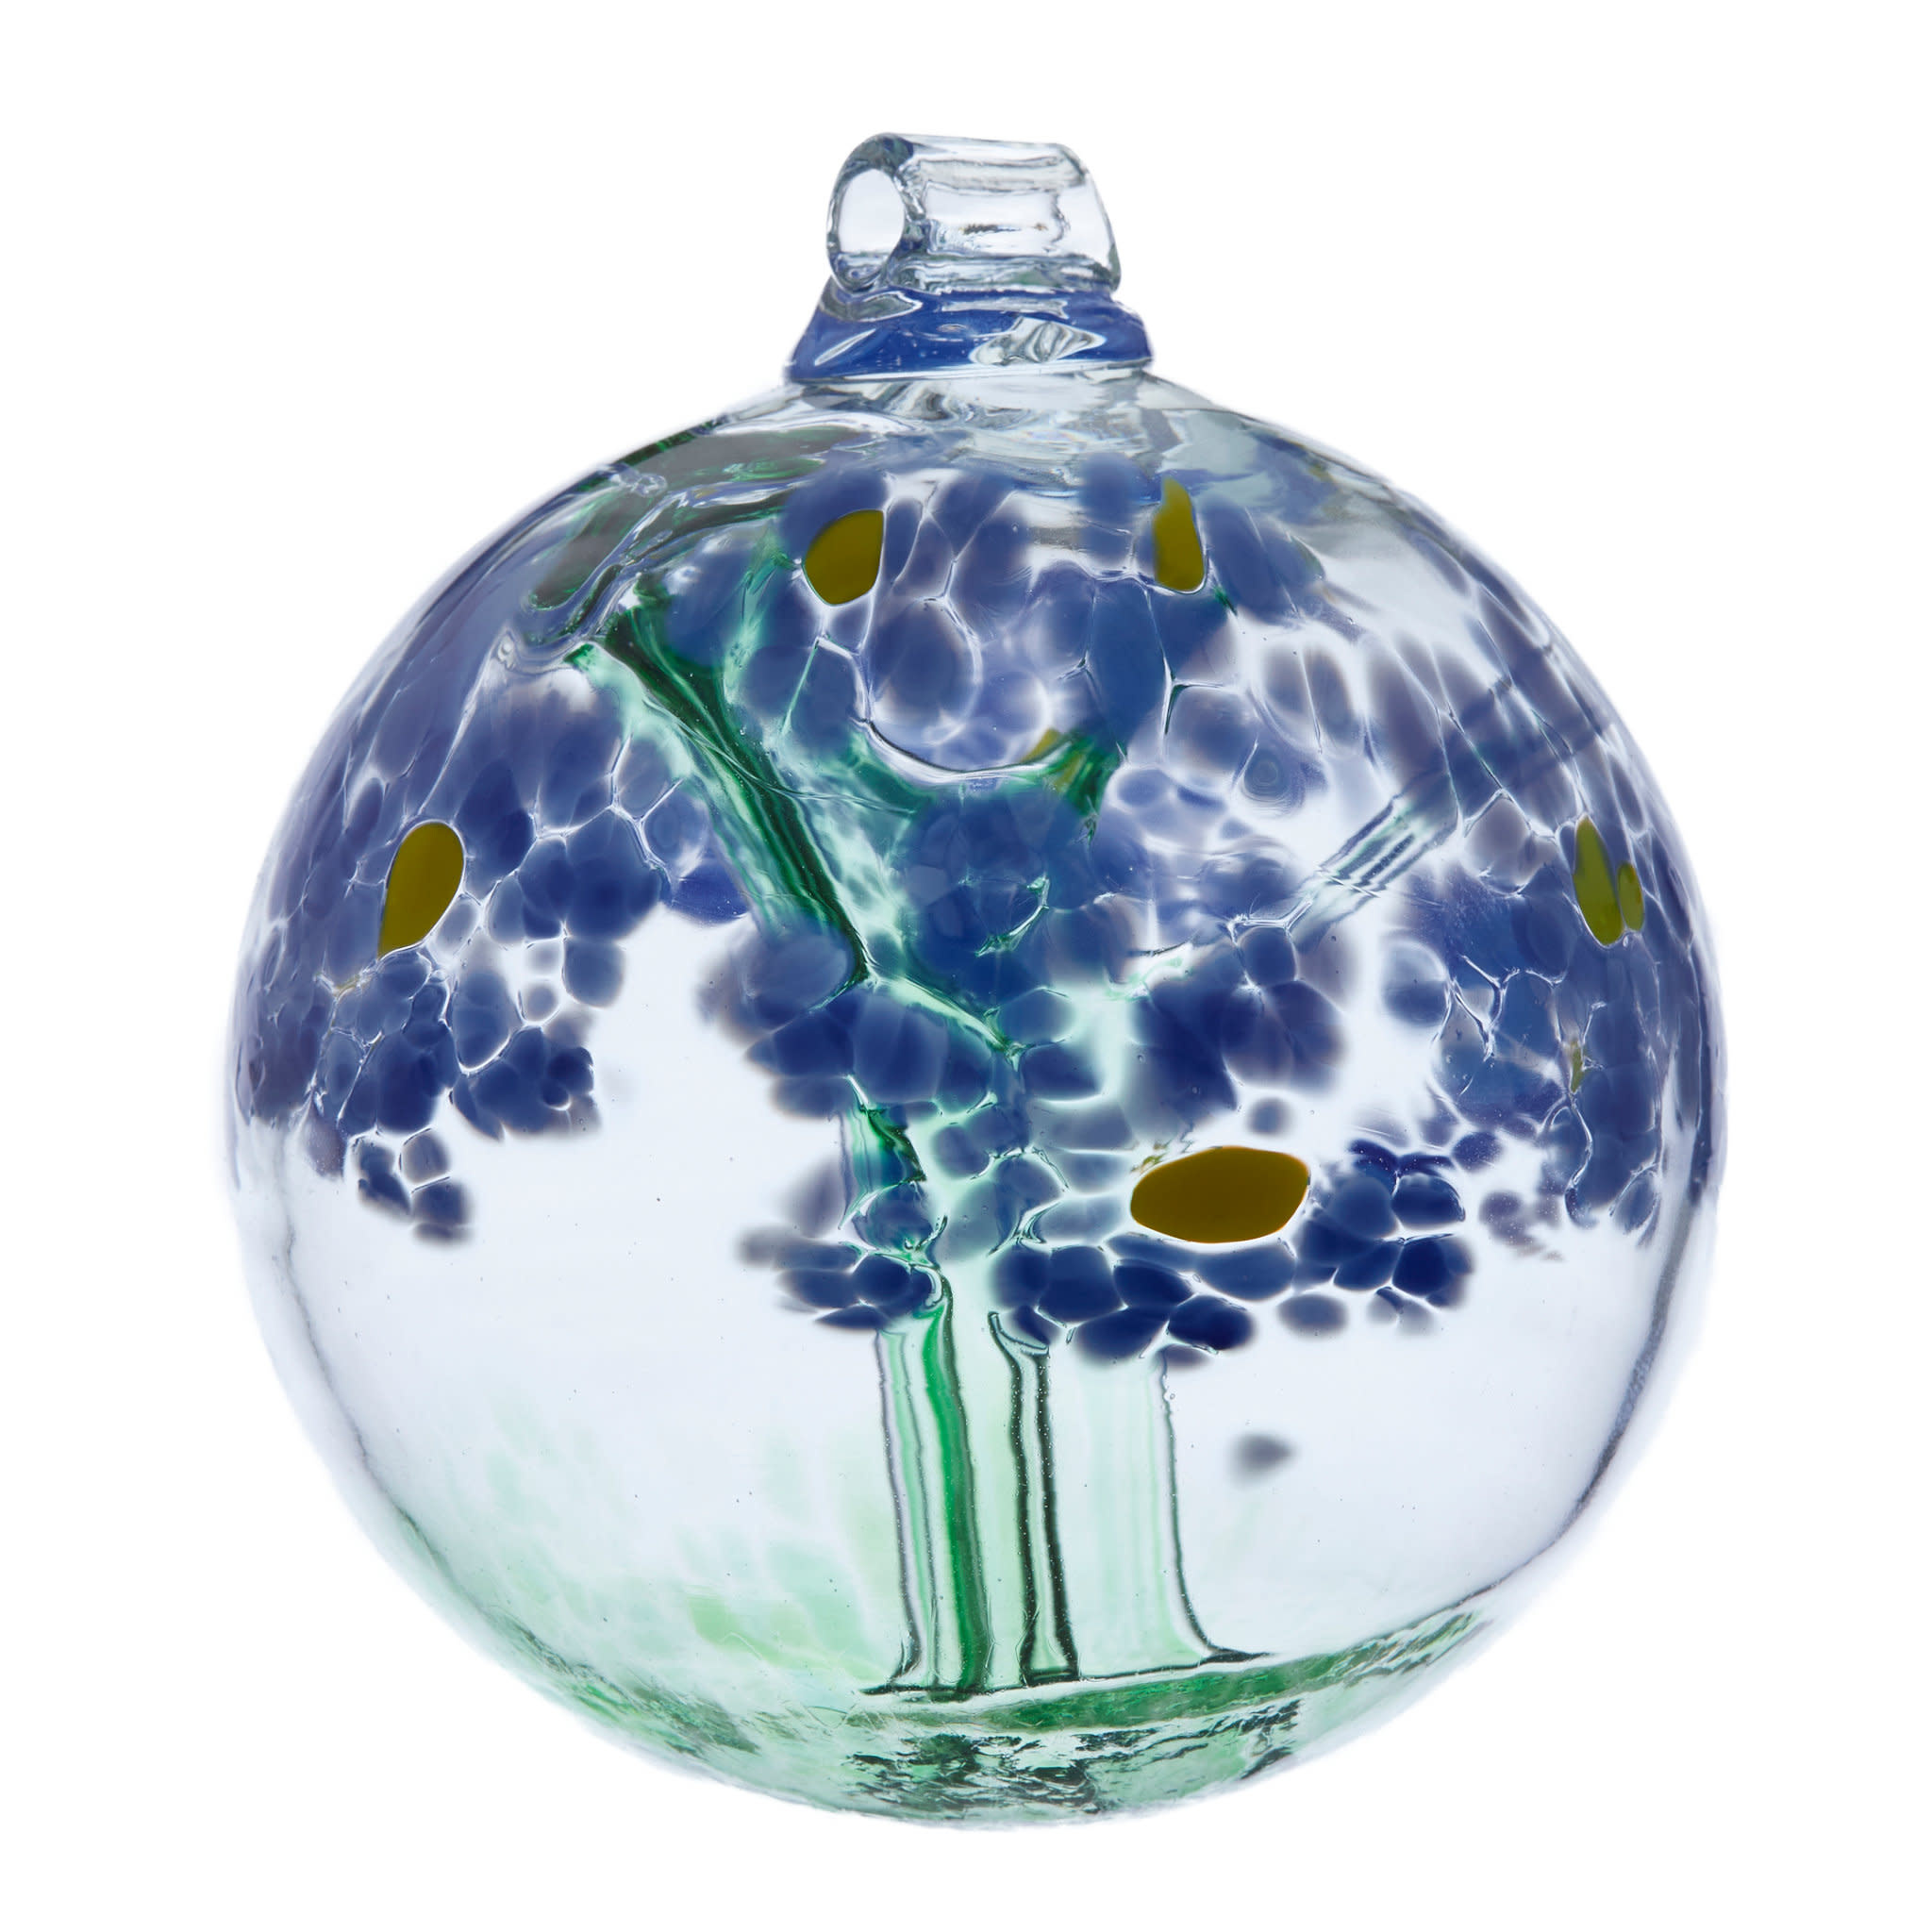 GLASS BALL BLOSSOM, 3" THINKING OF YOU